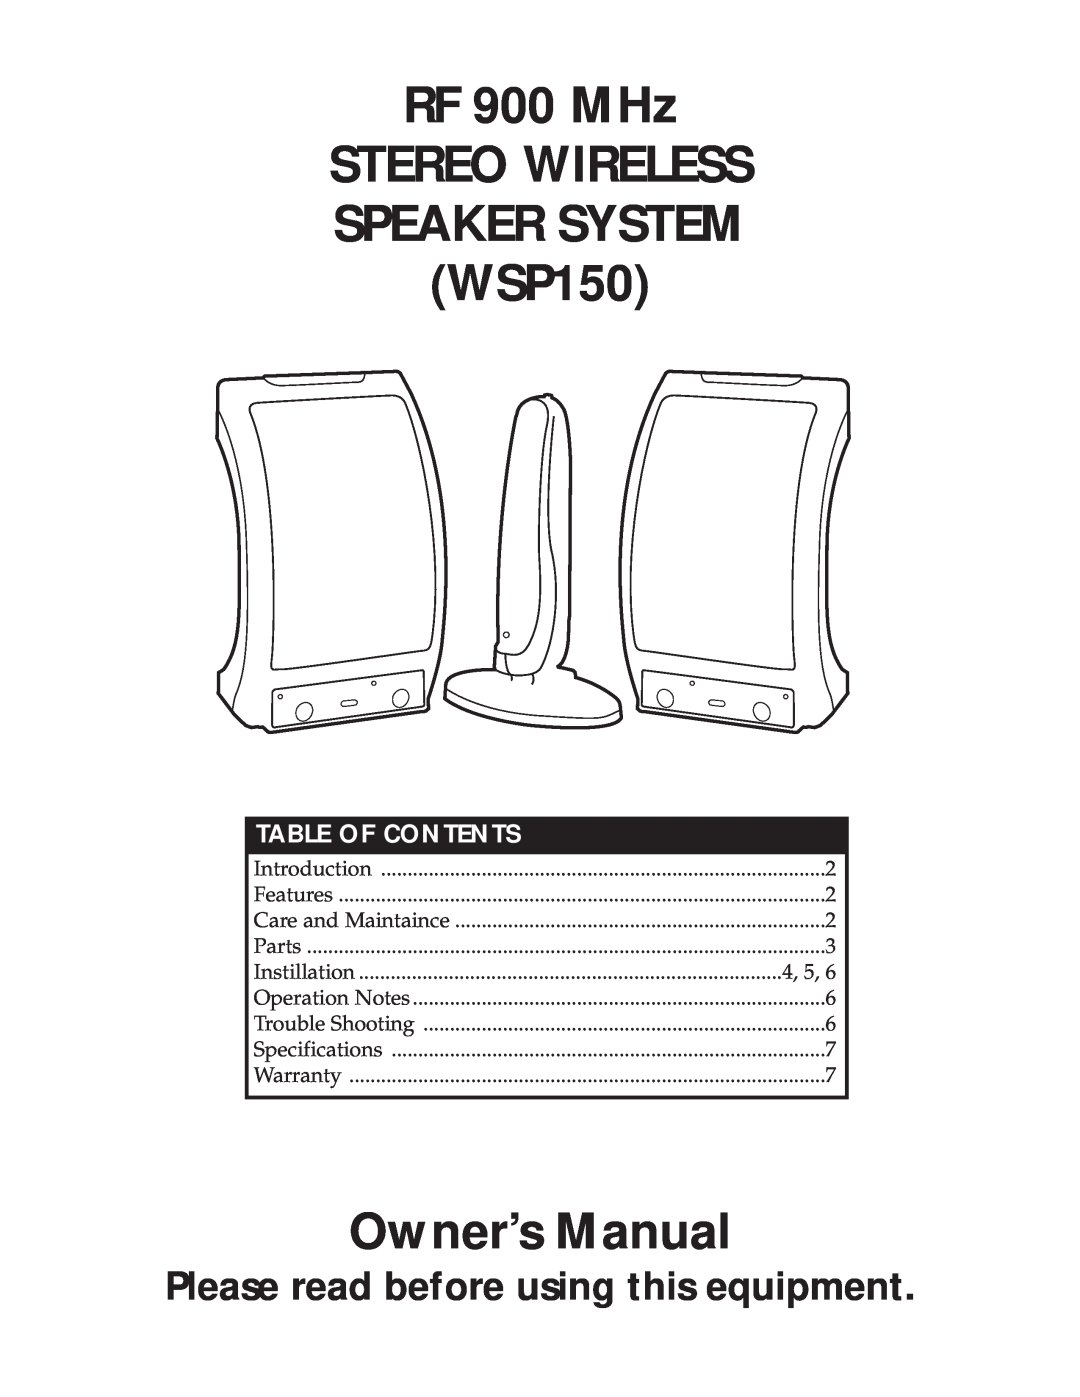 RCA owner manual Table Of Contents, RF 900 MHz, STEREO WIRELESS SPEAKER SYSTEM WSP150 